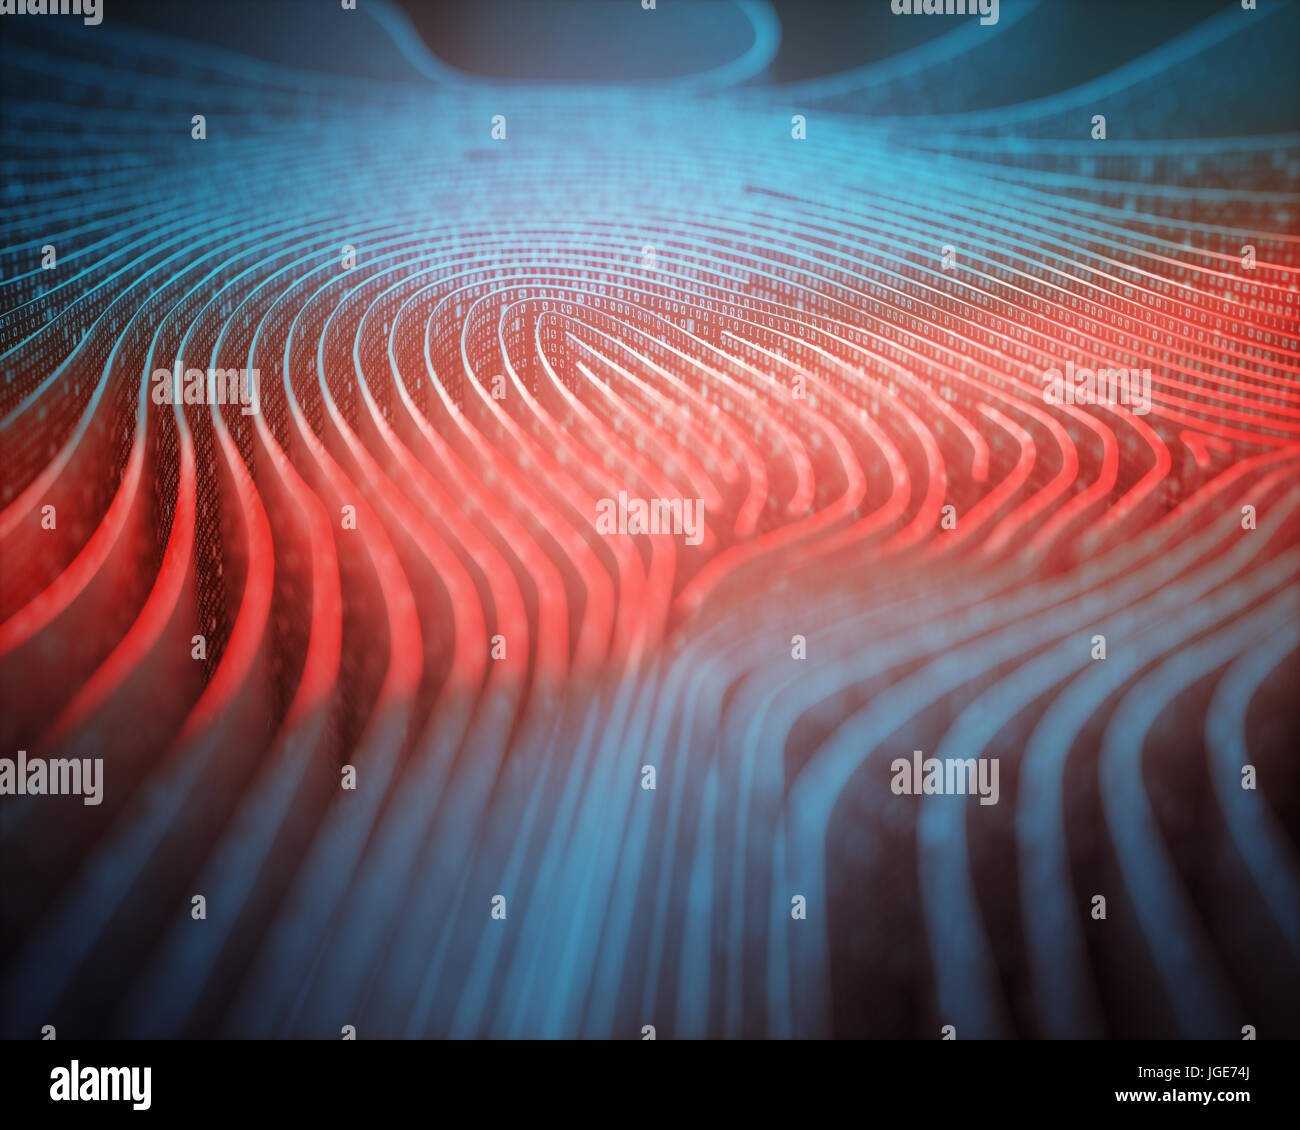 3D illustration. Fingerprint in labyrinth format, with binary codes being read by red scanner. Stock Photo